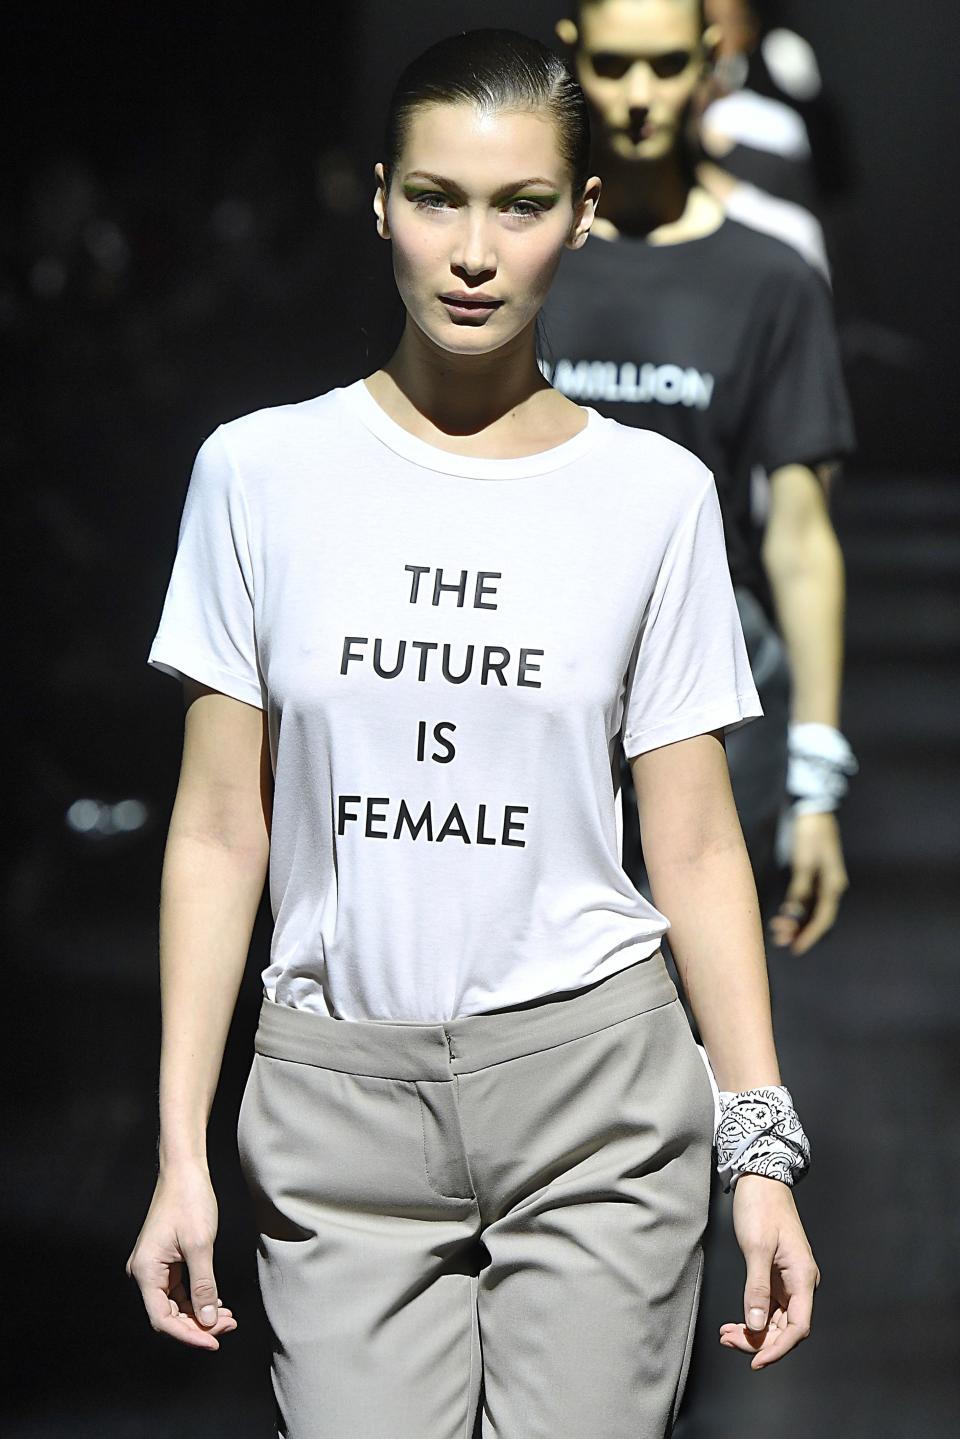 Check out the biggest and most empowering feminist moments at Fashion Week, from brands such as Mara Hoffman and Prabal Gurung.